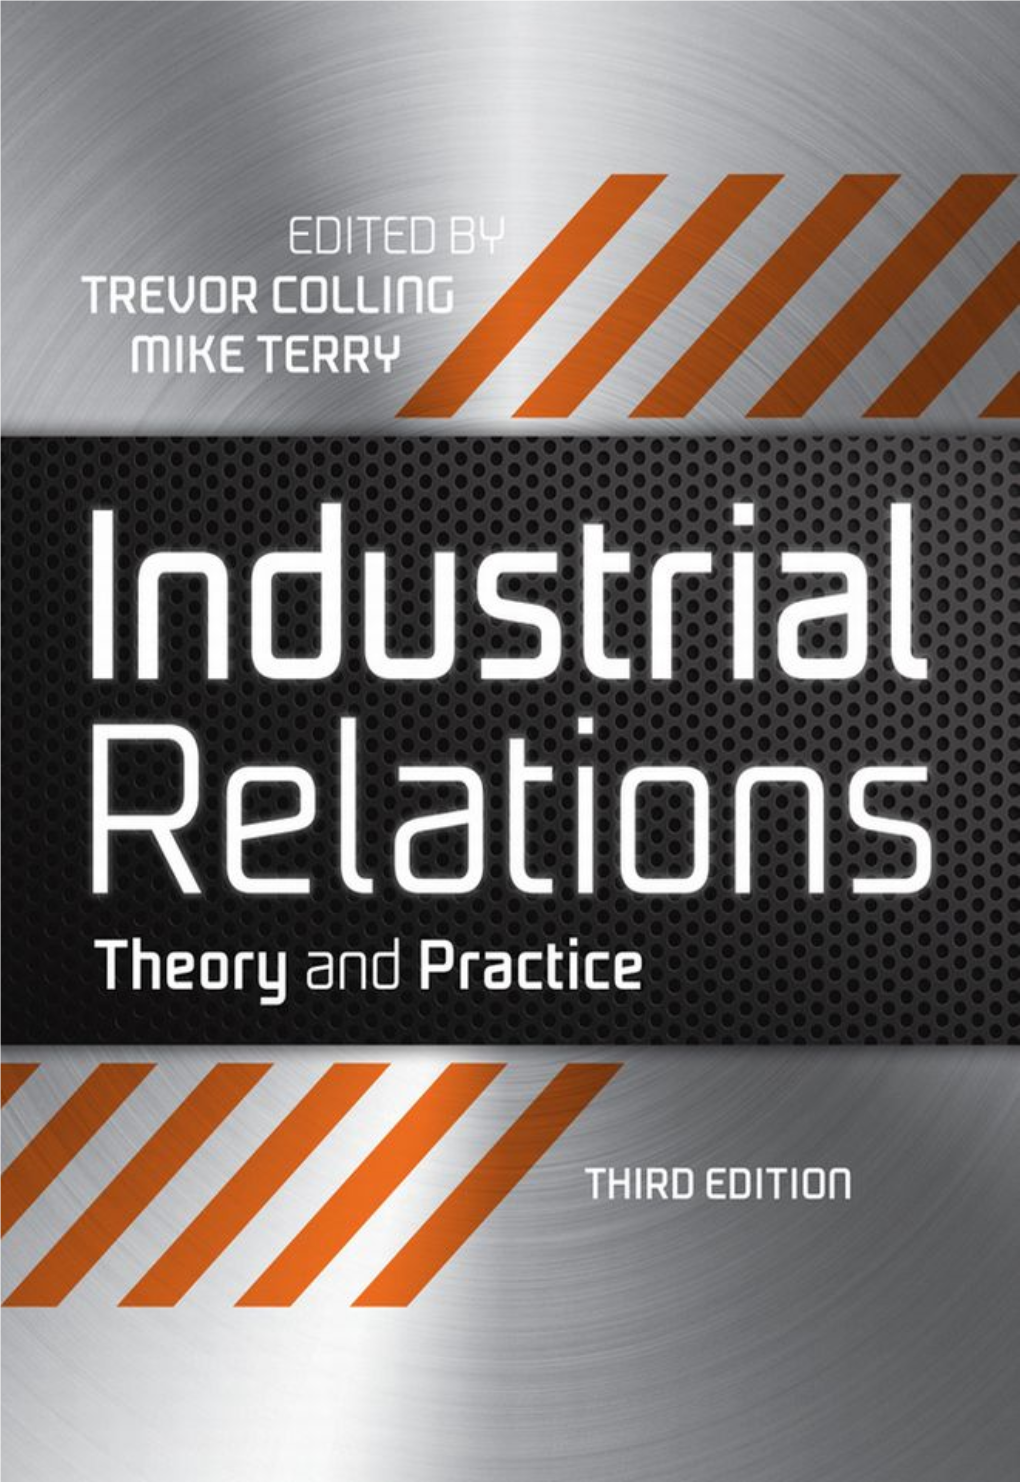 Industrial Relations Theory and Practice.Pdf